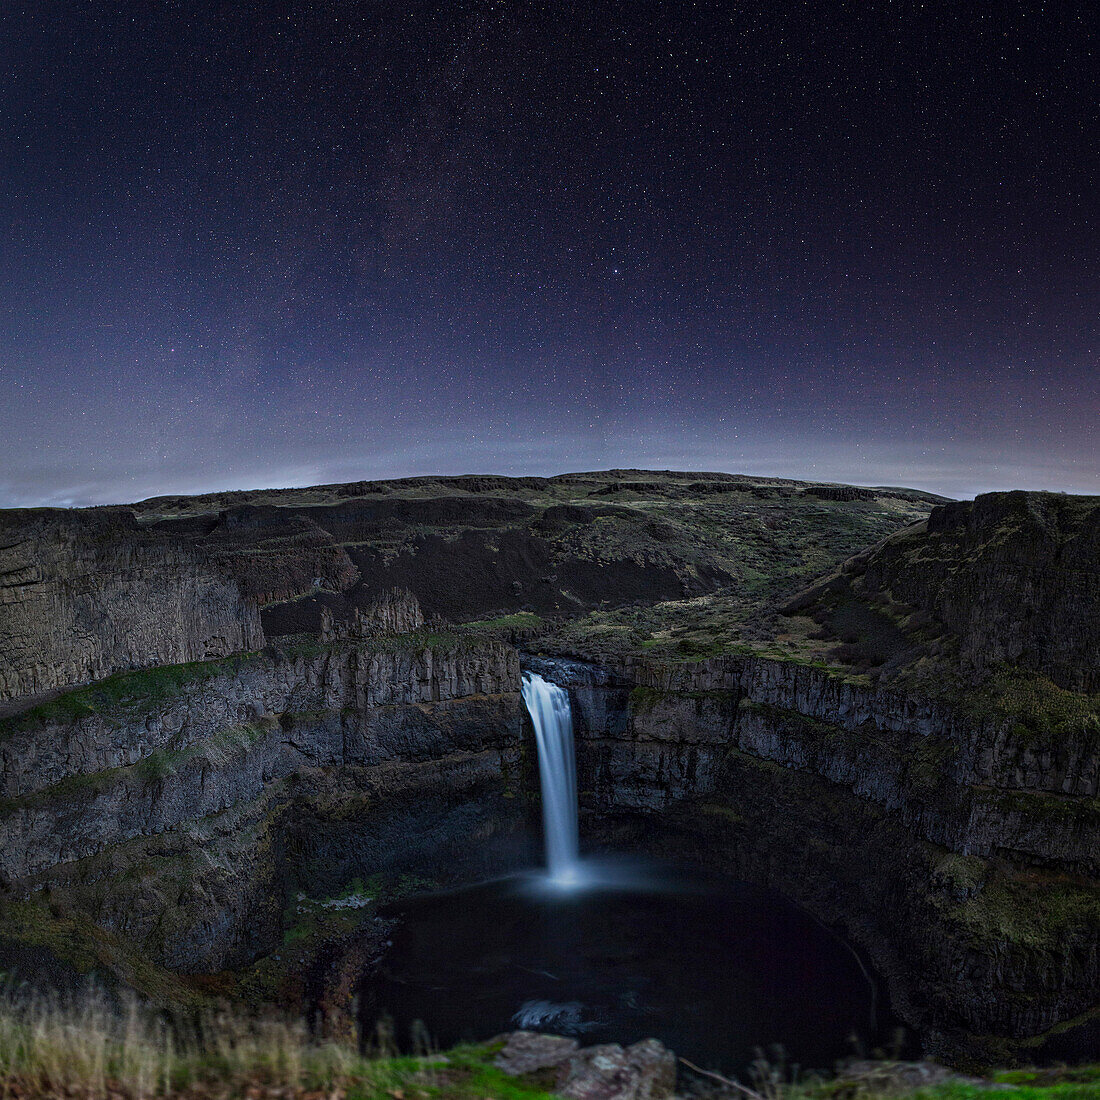 Waterfall pouring over rocky cliff, The Dalles, Oregon, United States